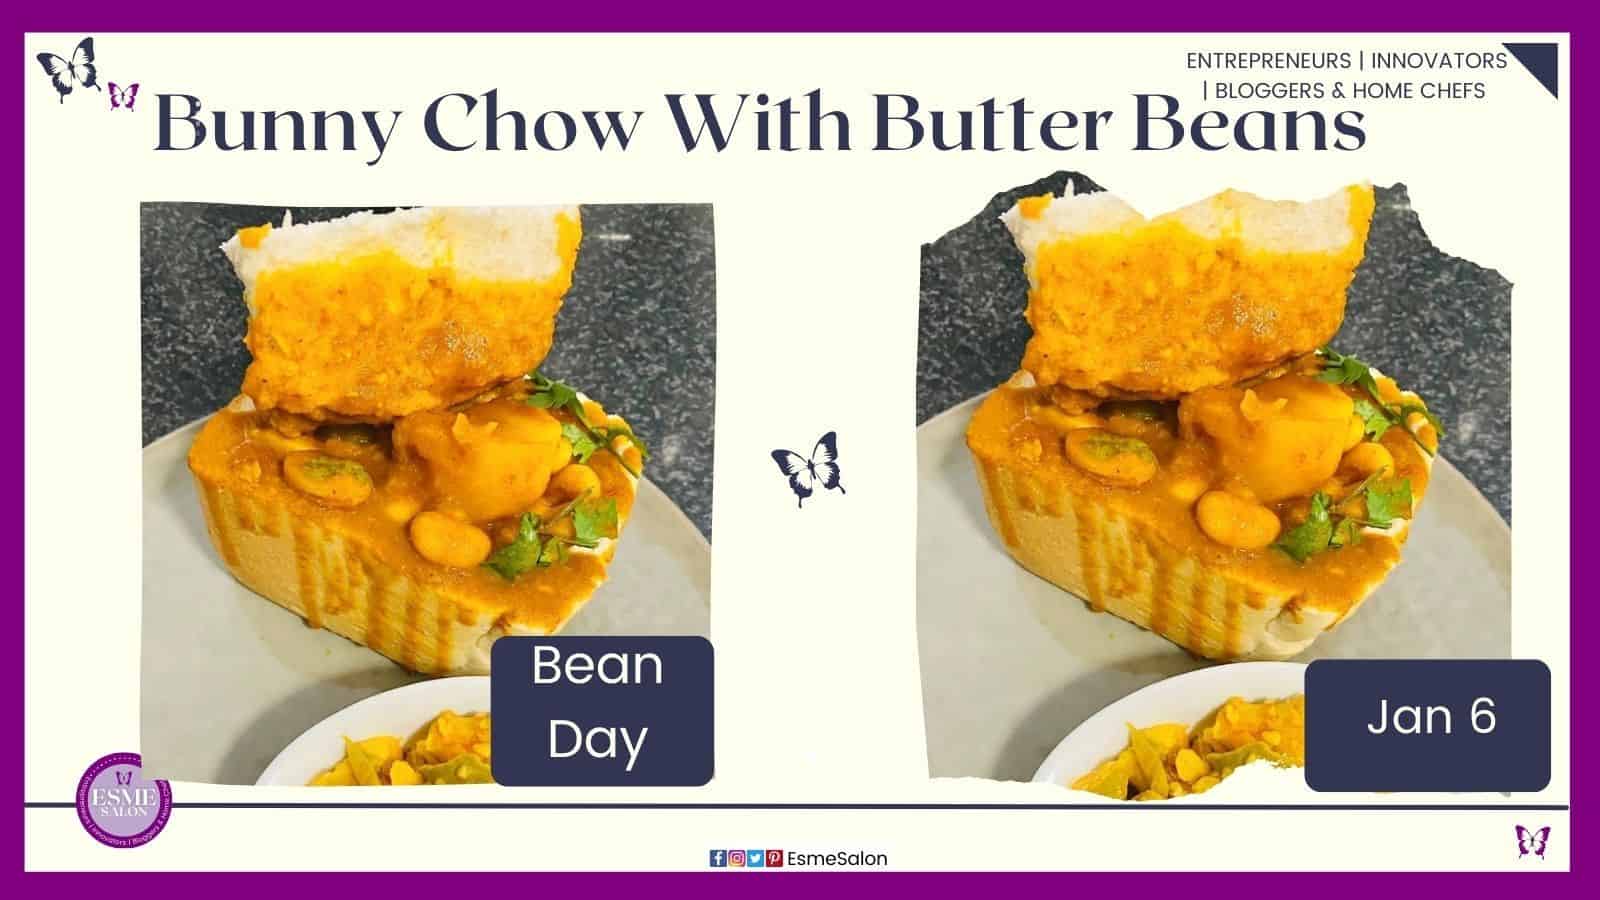 an image Bunny Chow with Butter Beans, a loaf of bread with beans mixture in the middle, SA delicacy